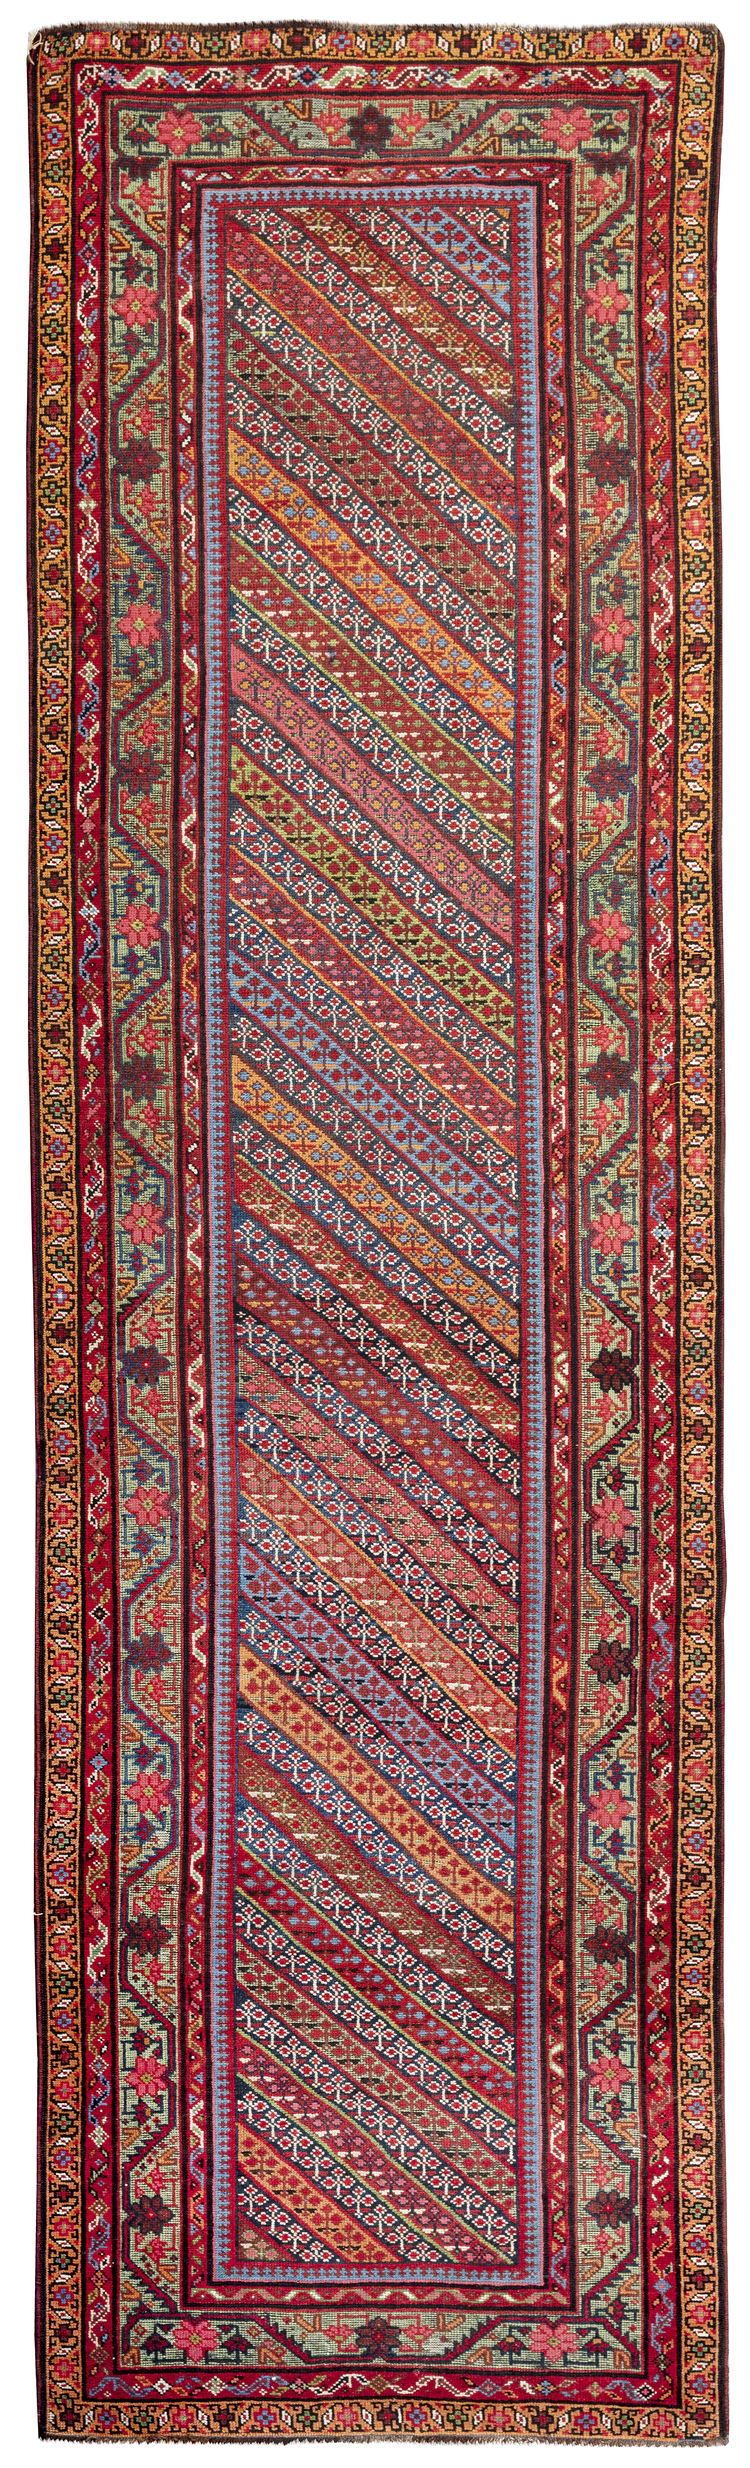 A SAL (STRIPES) RUNNER, NORTH WEST PERSIA, END 19TH CENTURY